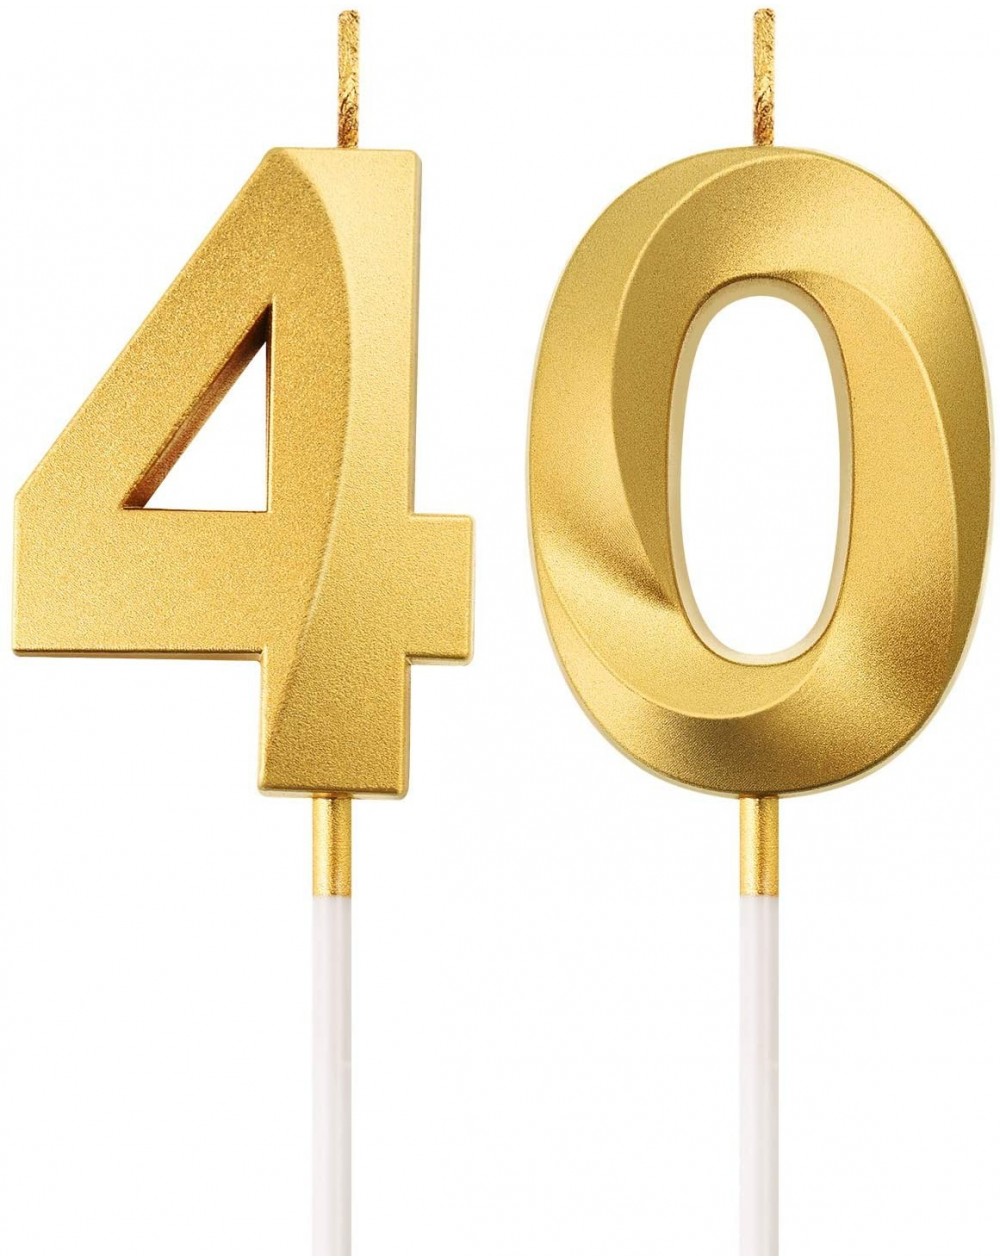 Cake Decorating Supplies 40th Birthday Candles Cake Numeral Candles Happy Birthday Cake Topper Decoration for Birthday Party ...